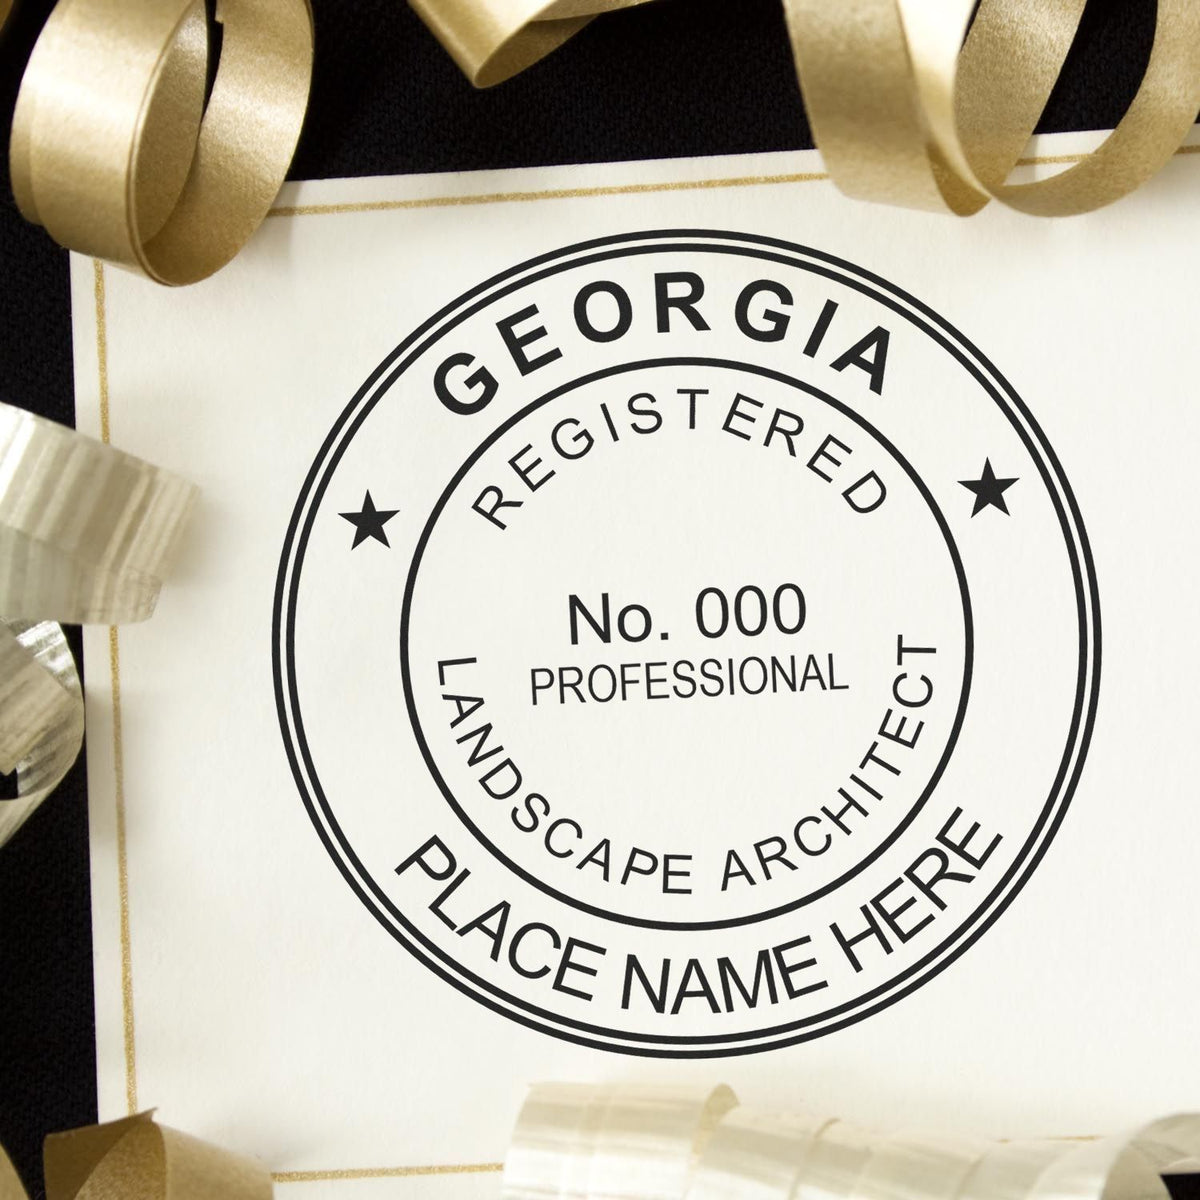 This paper is stamped with a sample imprint of the Georgia Landscape Architectural Seal Stamp, signifying its quality and reliability.